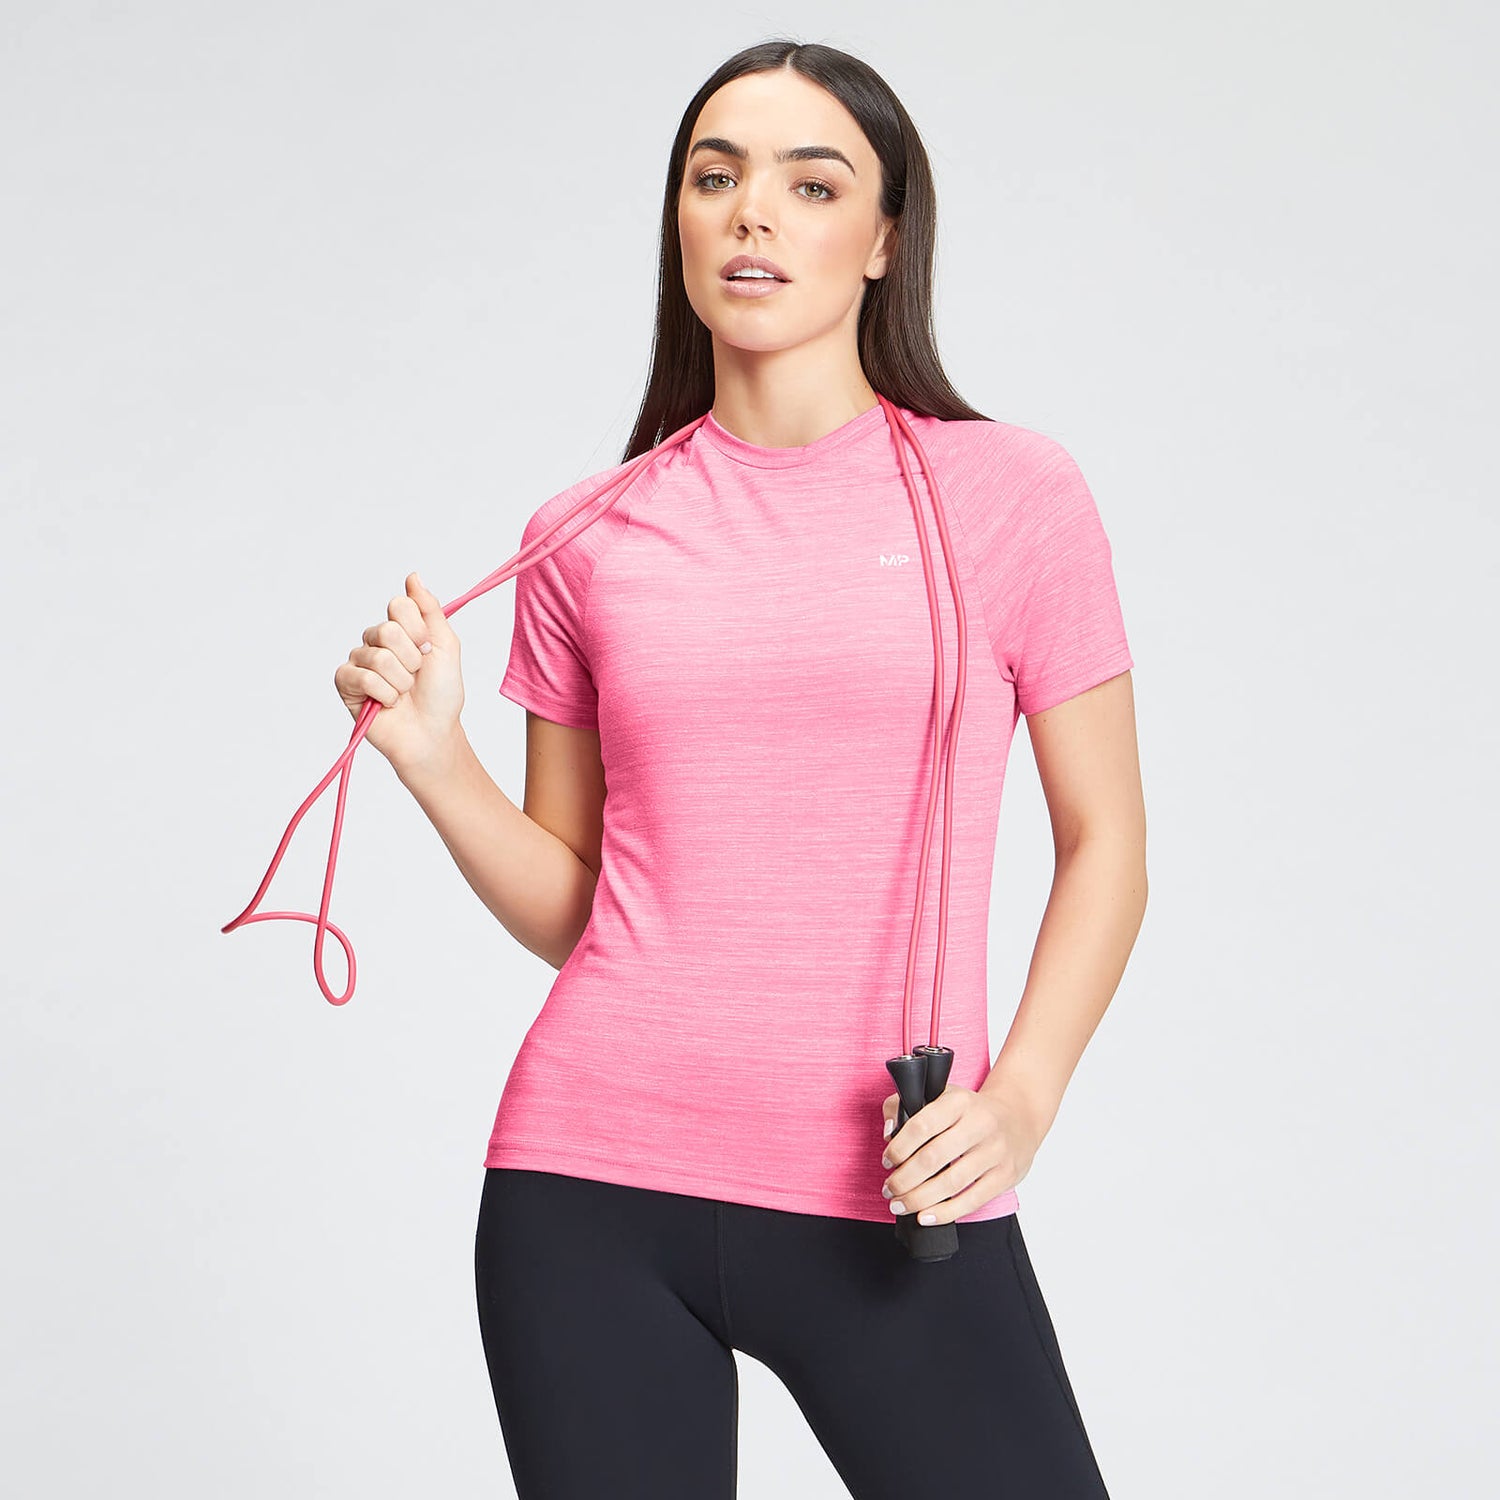 MP Women's Performance Training T-Shirt - Candyfloss Marl with White Fleck - XS